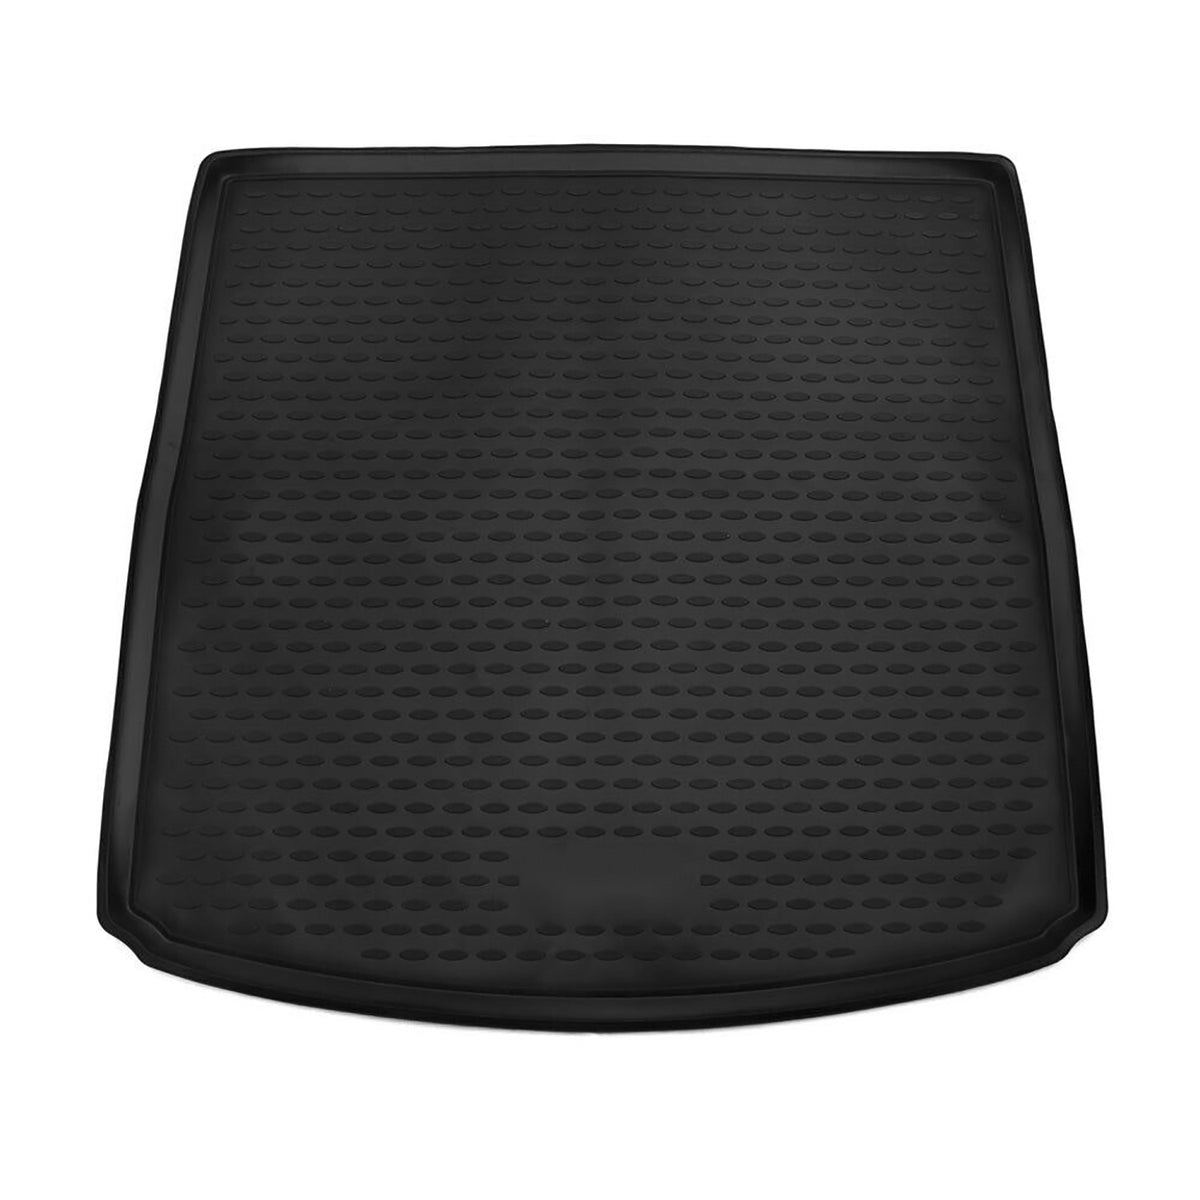 Boot mat boot liner for Seat Leon 2013-2020 station wagon rubber TPE black